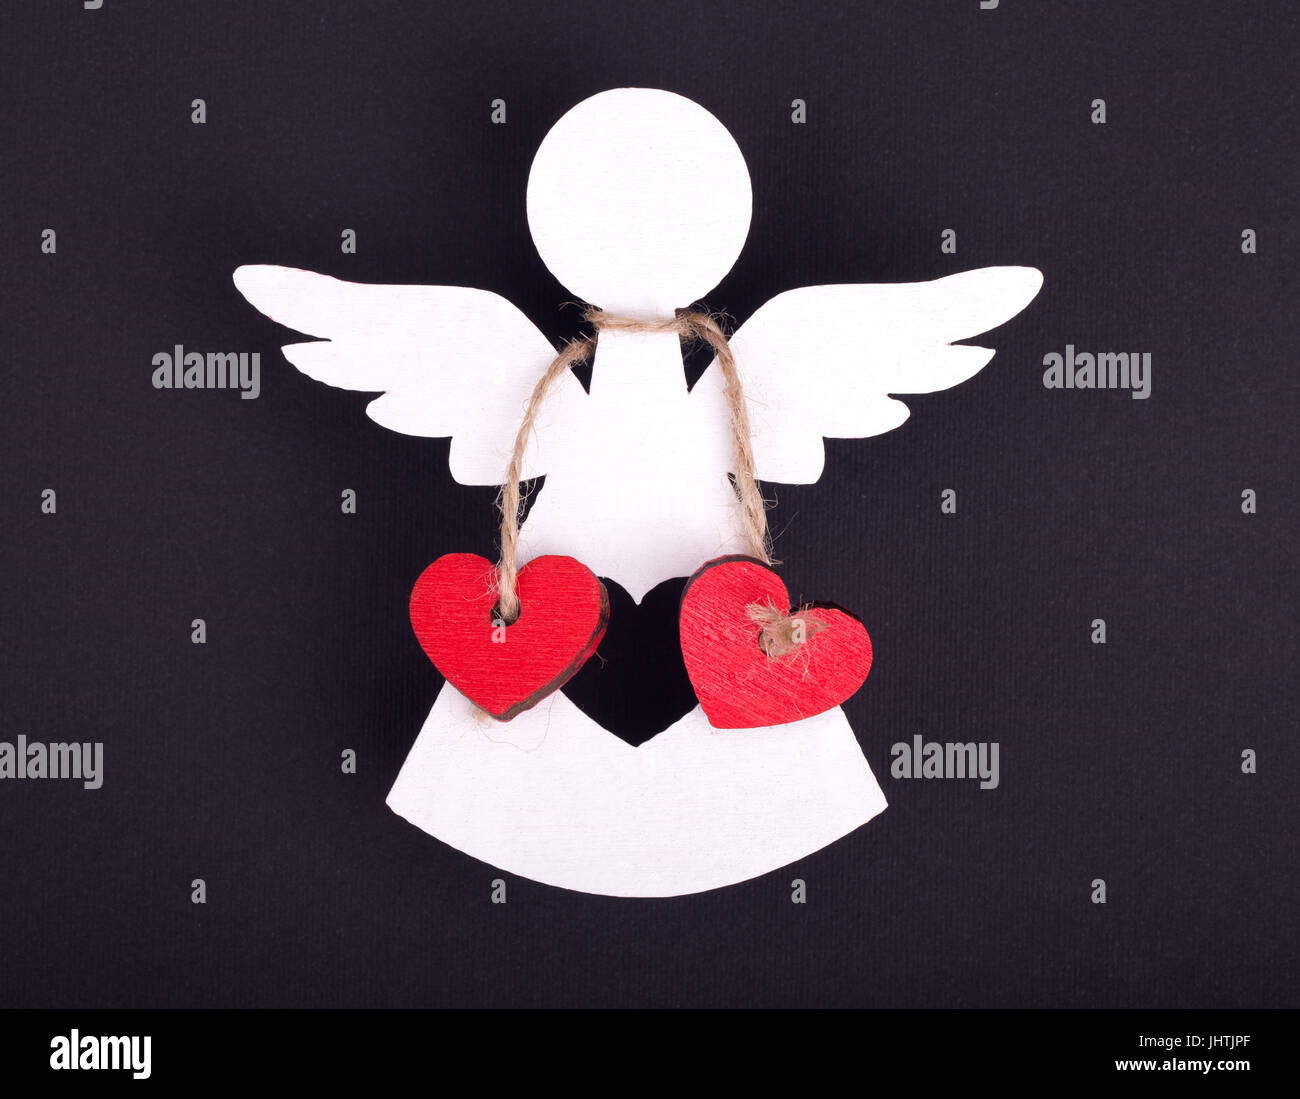 Christmas decorations of white angel with two linked red hearts on a black background Stock Photo